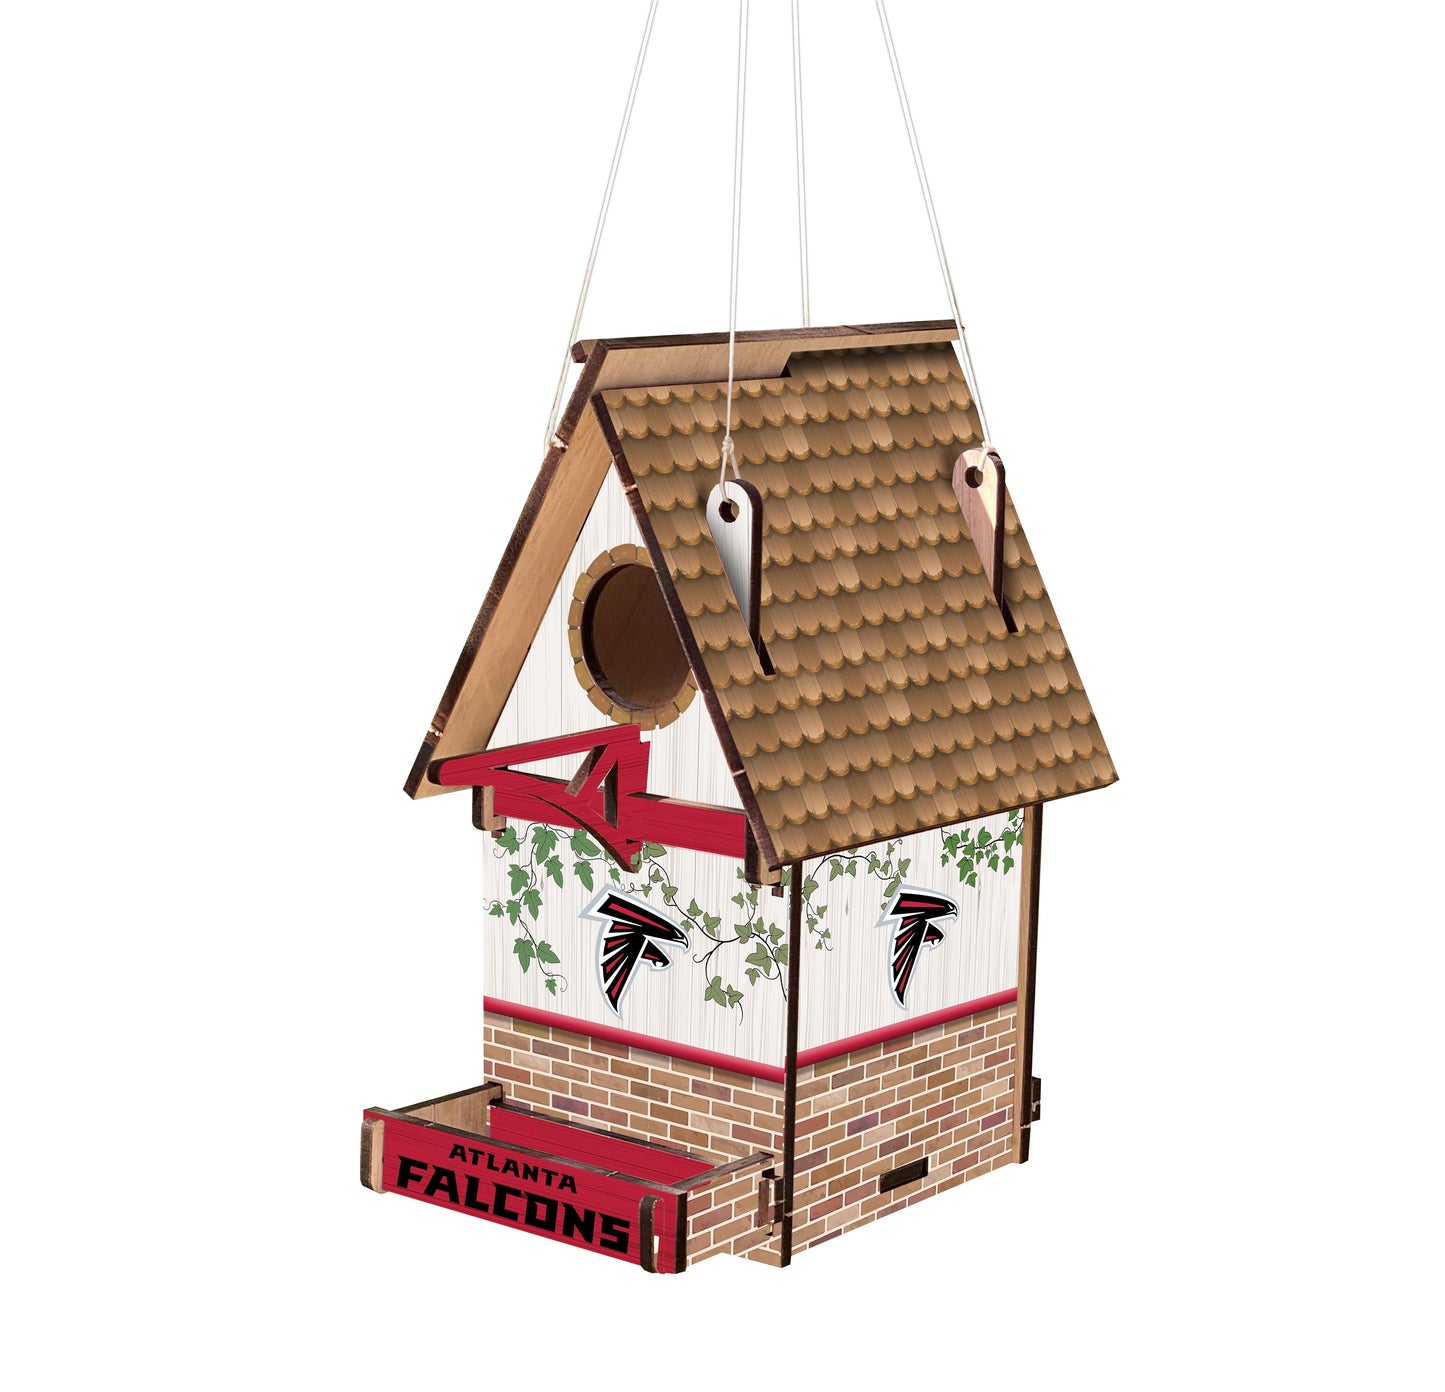 Atlanta Falcons NFL Wood Birdhouse: Made in USA, Officially Licensed, Vibrant Team Graphics, Durable Wood, 15" x 15